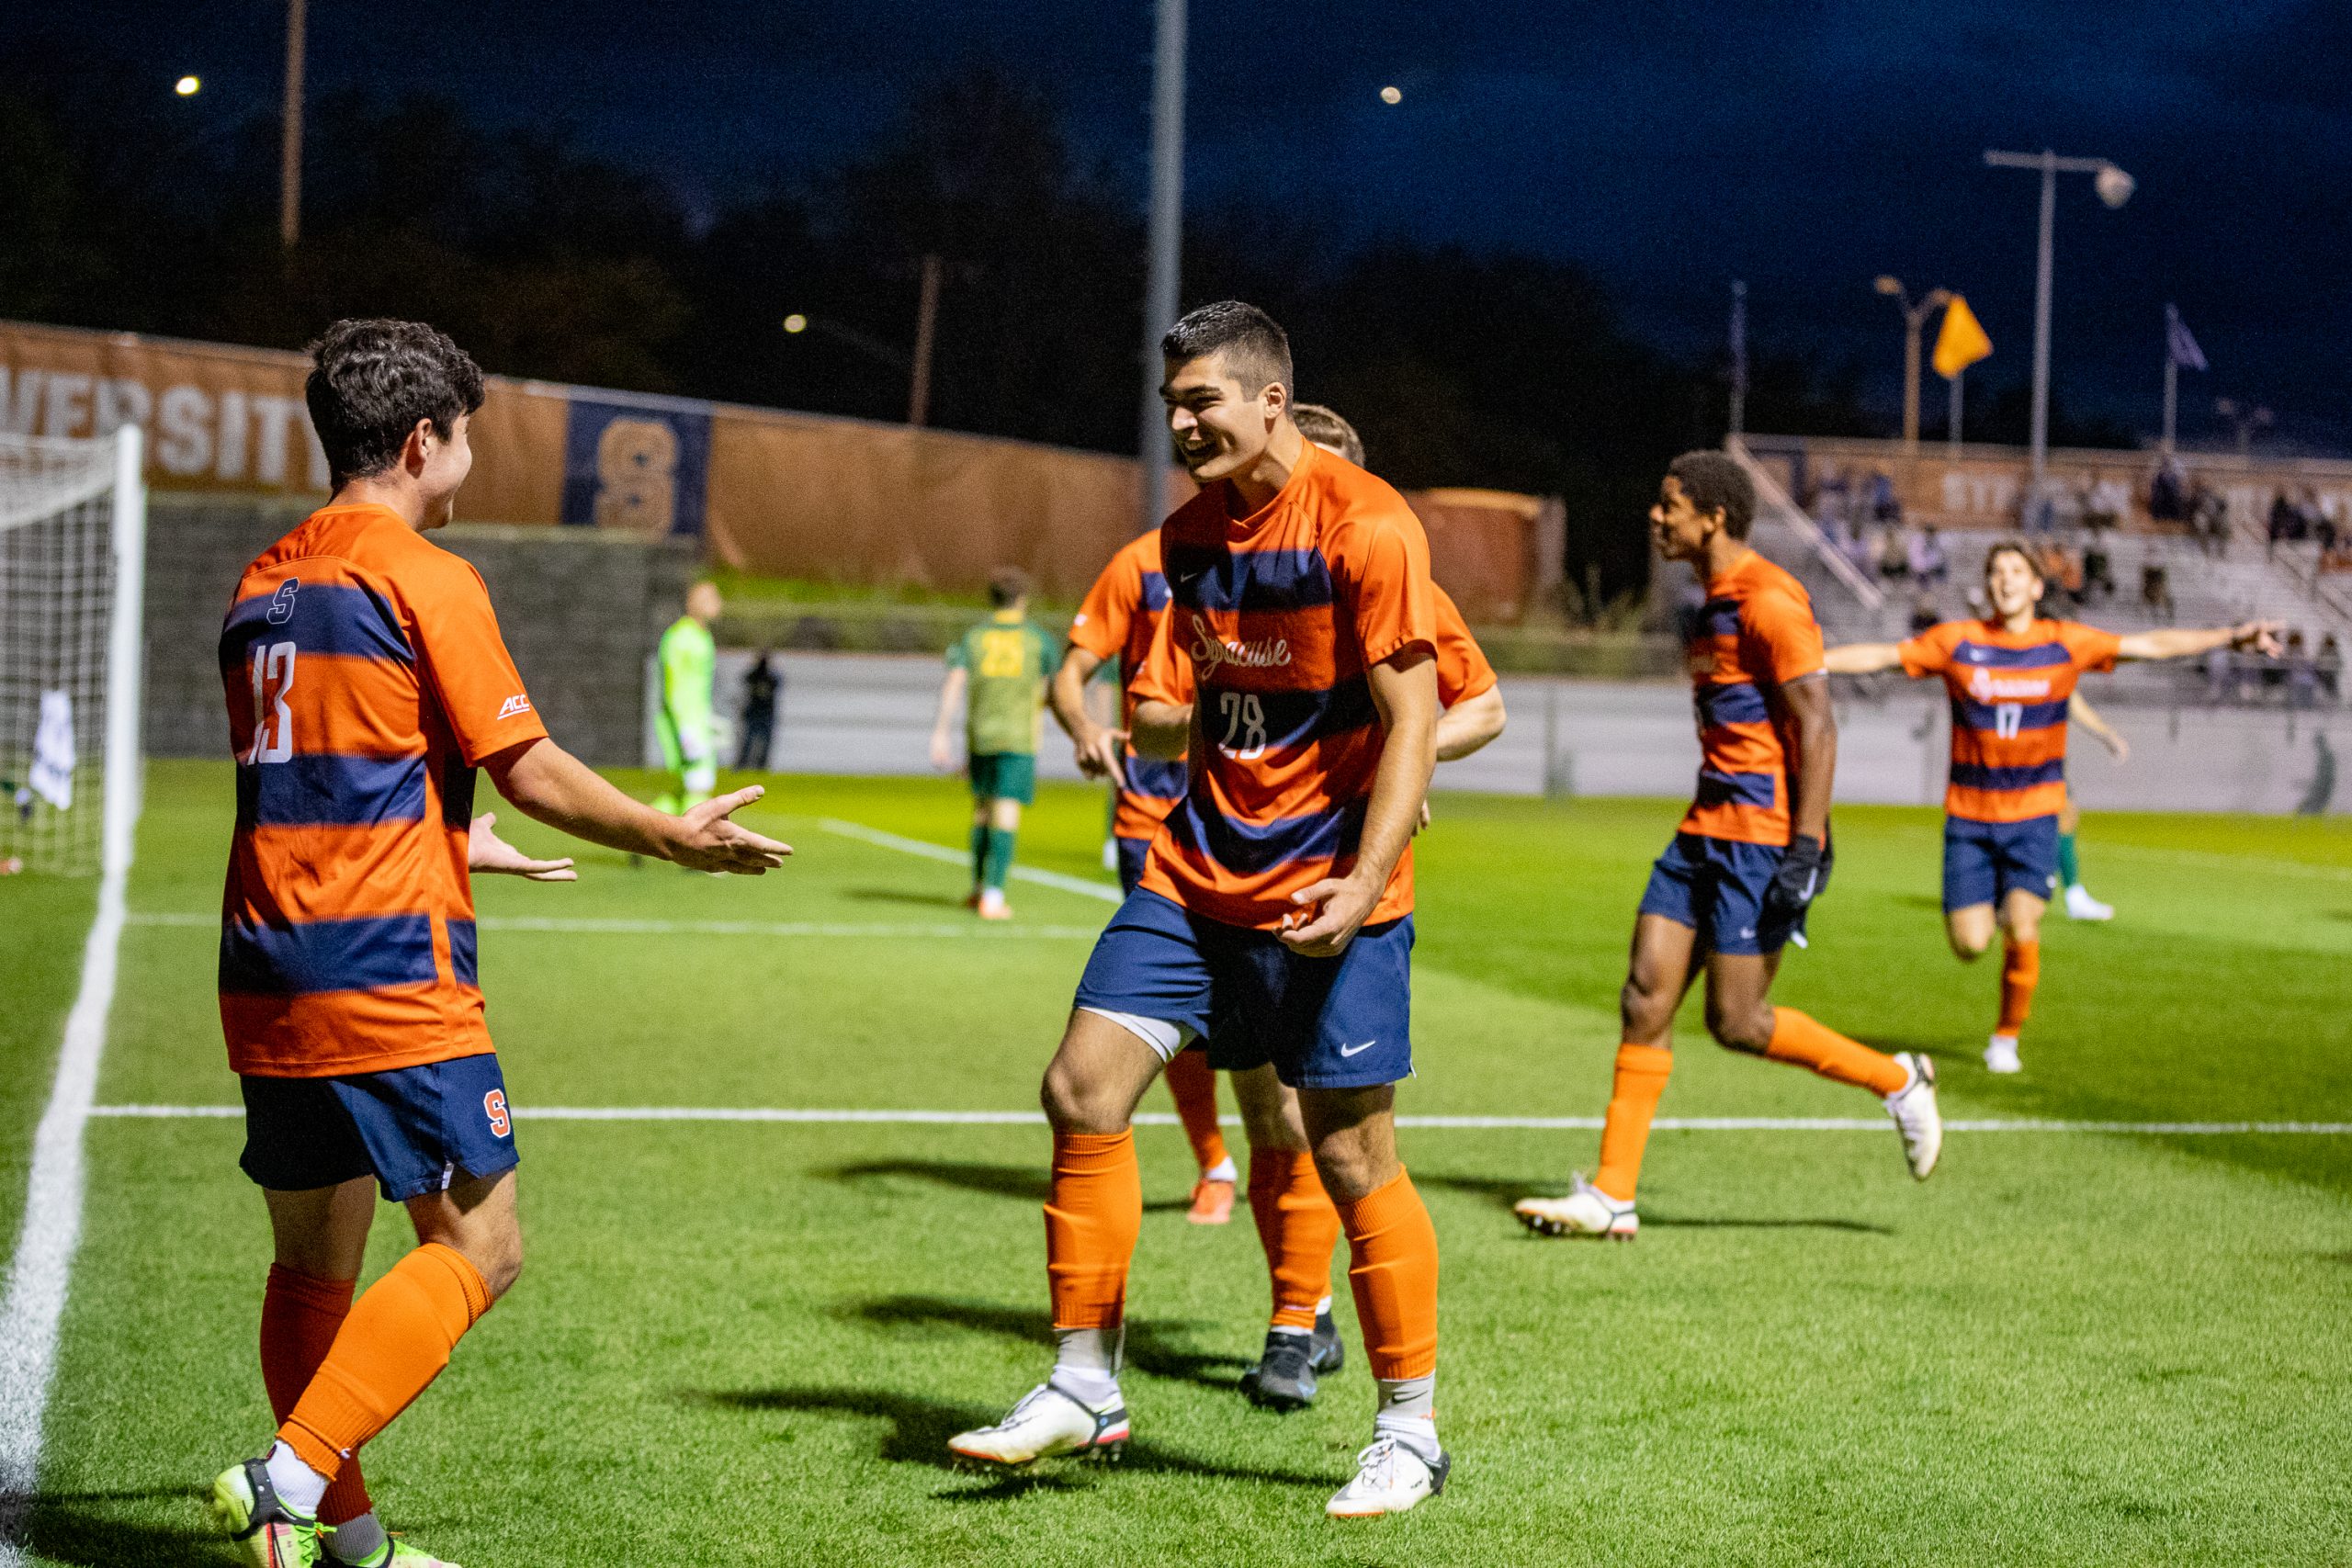 Colin Biros (13) celebrates with his teammates after scoring Syracuse's first goal during the Syracuse University Men's Soccer game vs UVM.